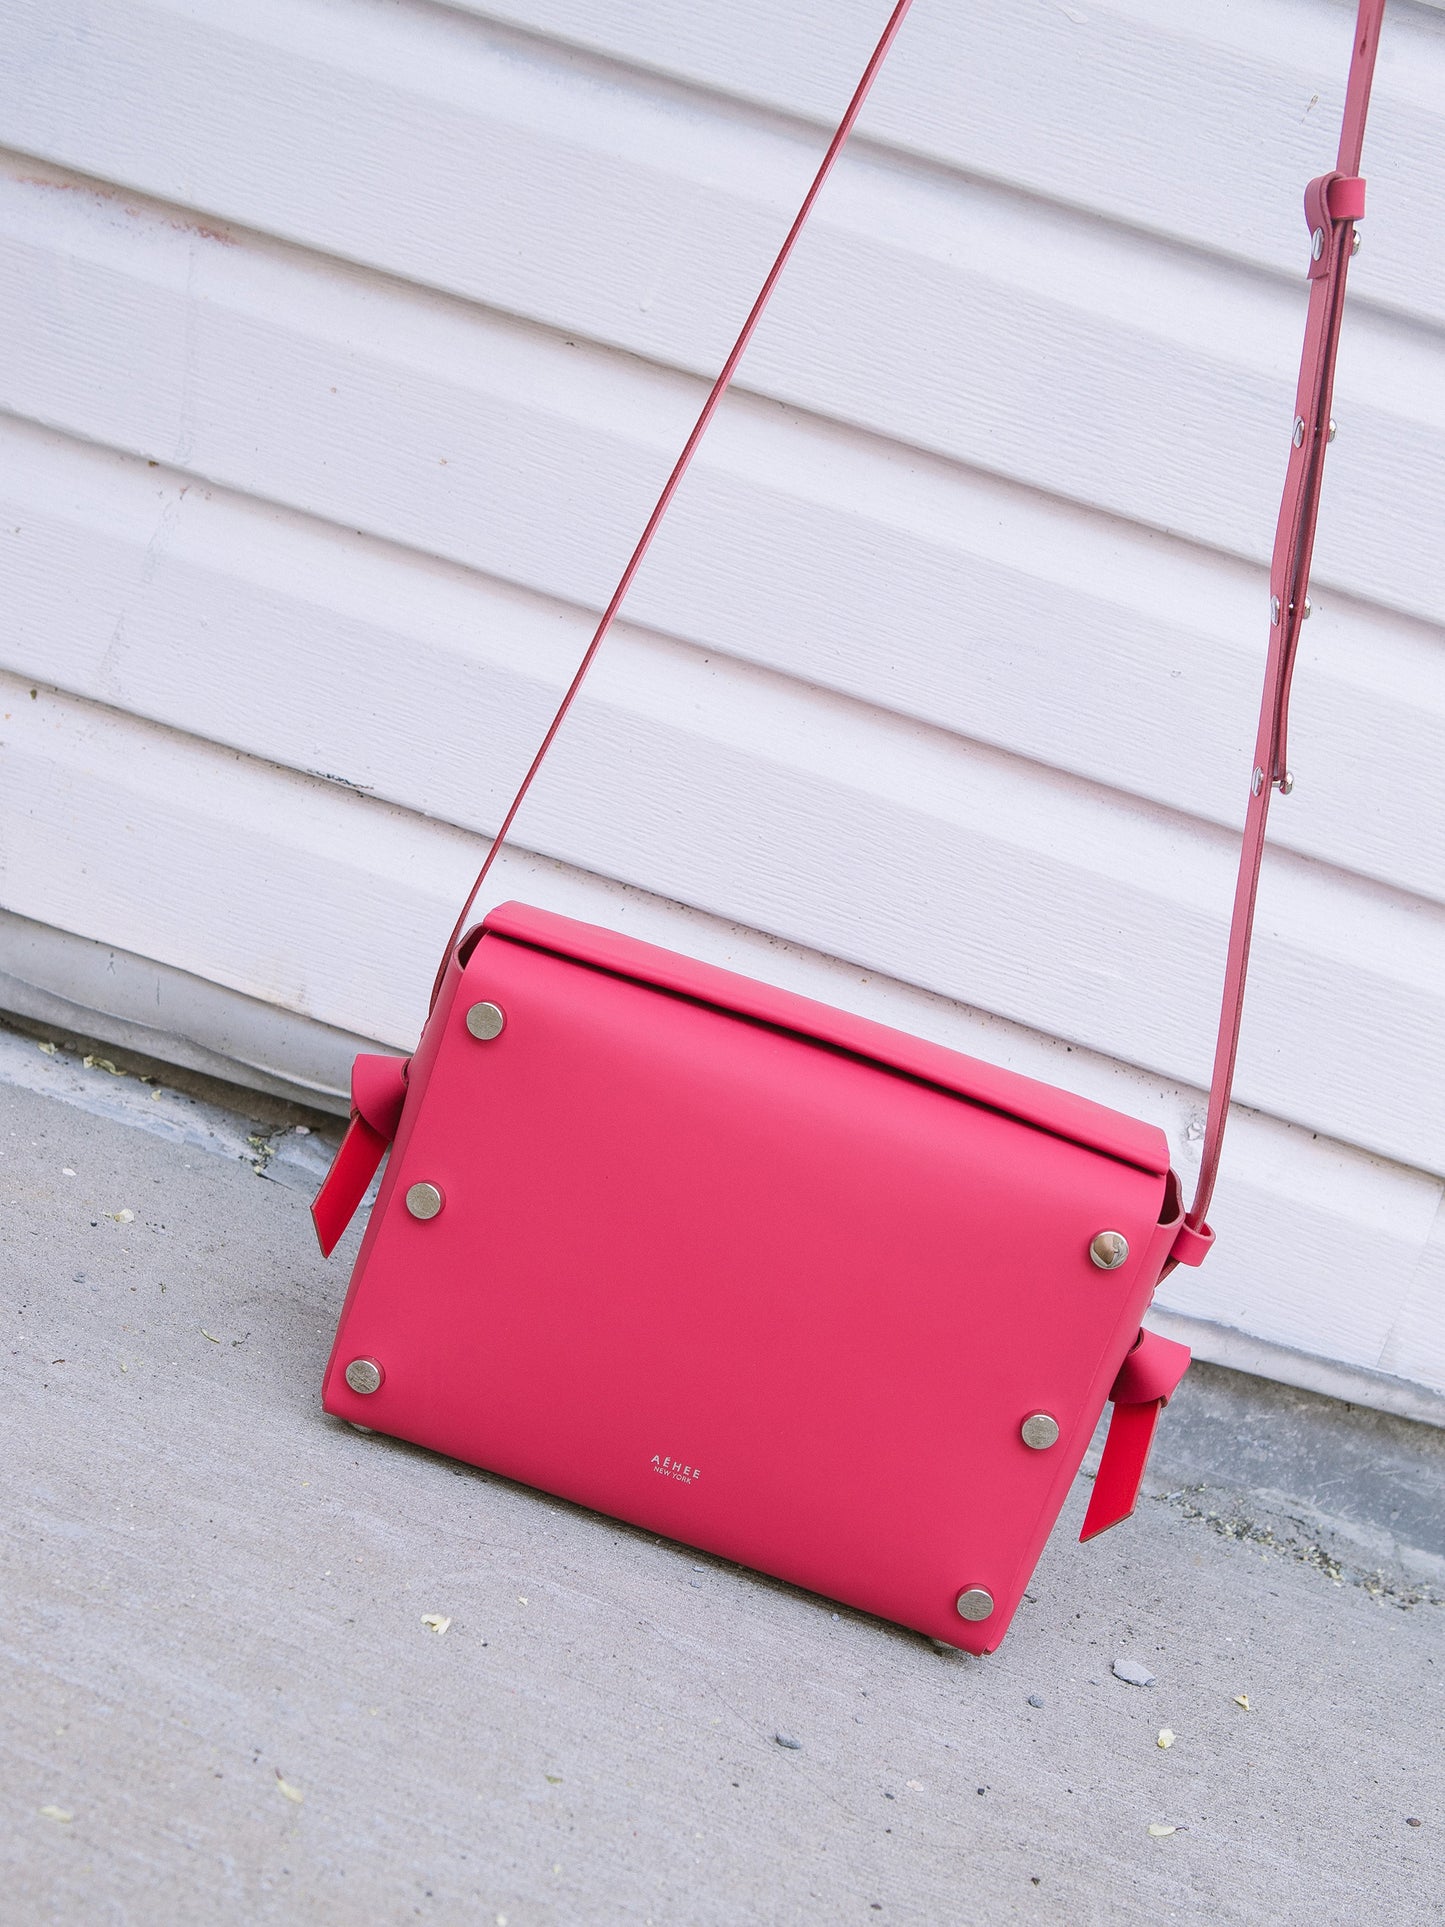 Chic red crossbody bag and shoulder bag with adjustable strap crafted from Italian vegetable tanned leather for a minimal yet sophisticated look.